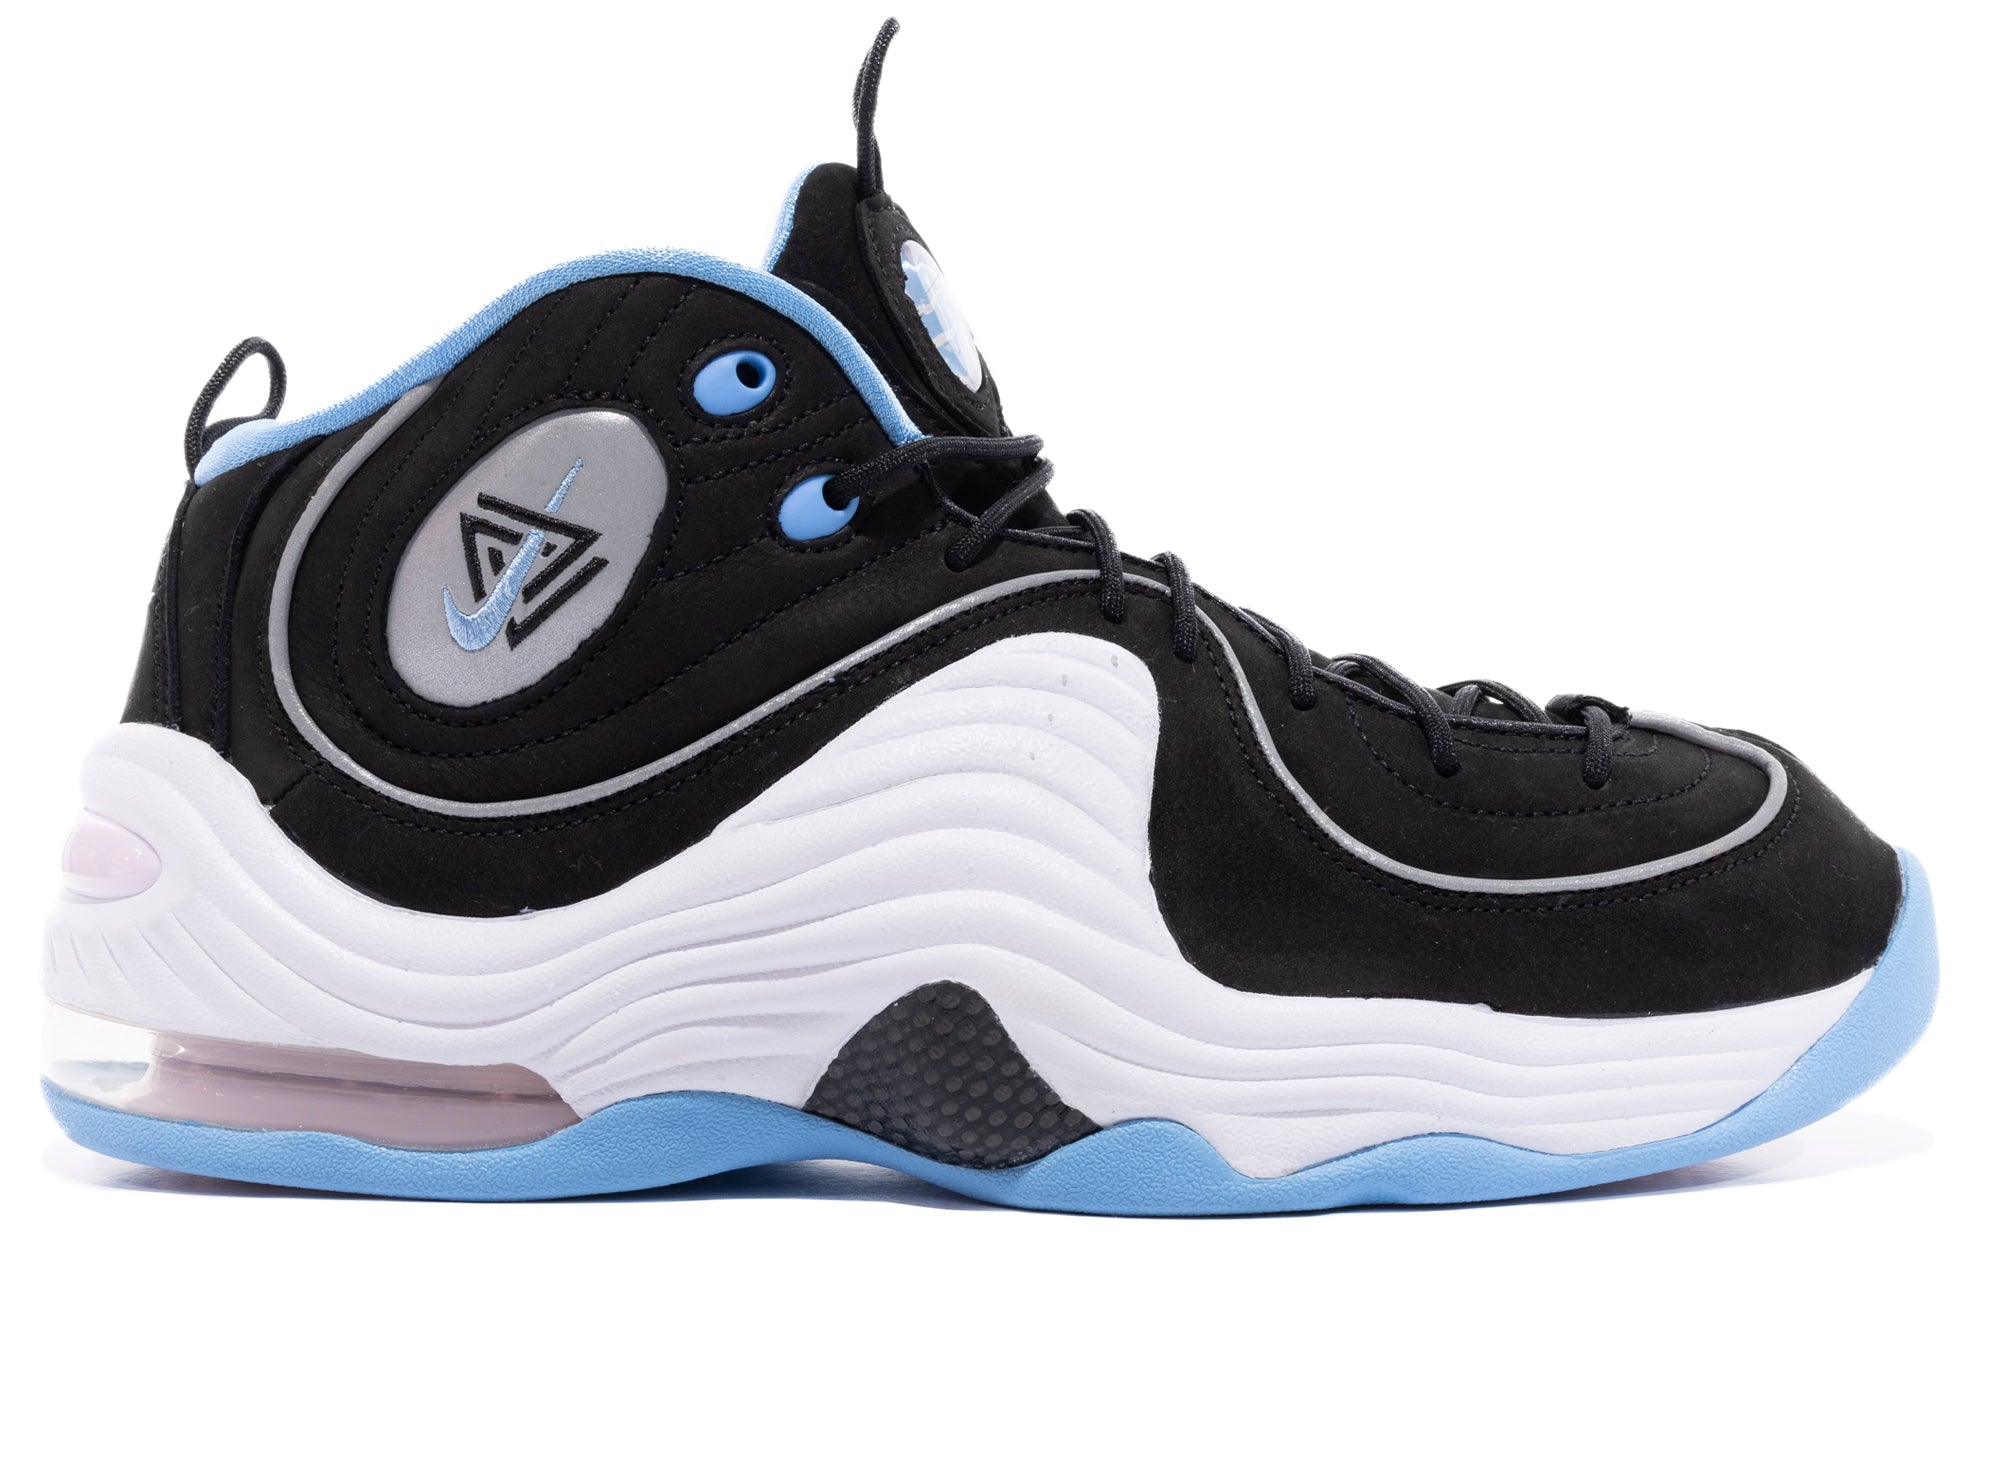 Nike x Status Air Penny Oneness Boutique